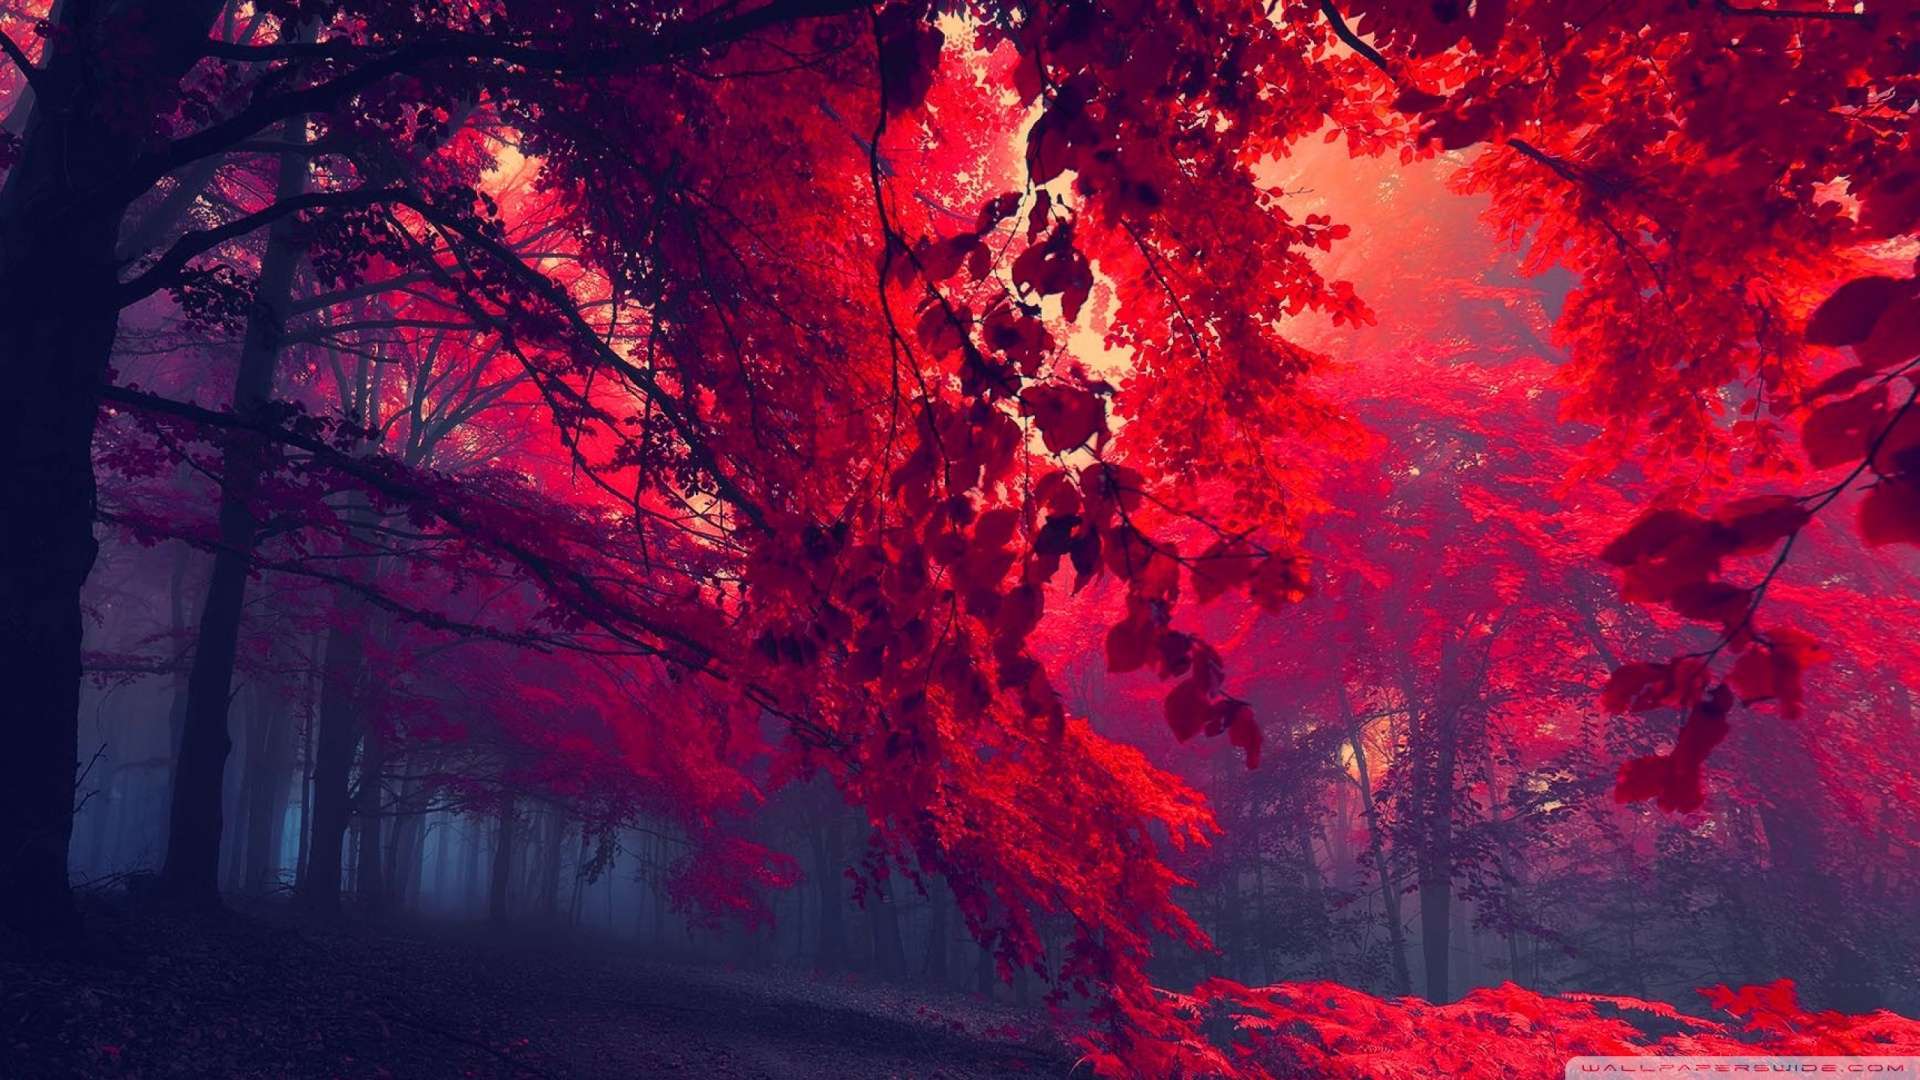 Wallpaper Red Forest 1080p HD Upload At February